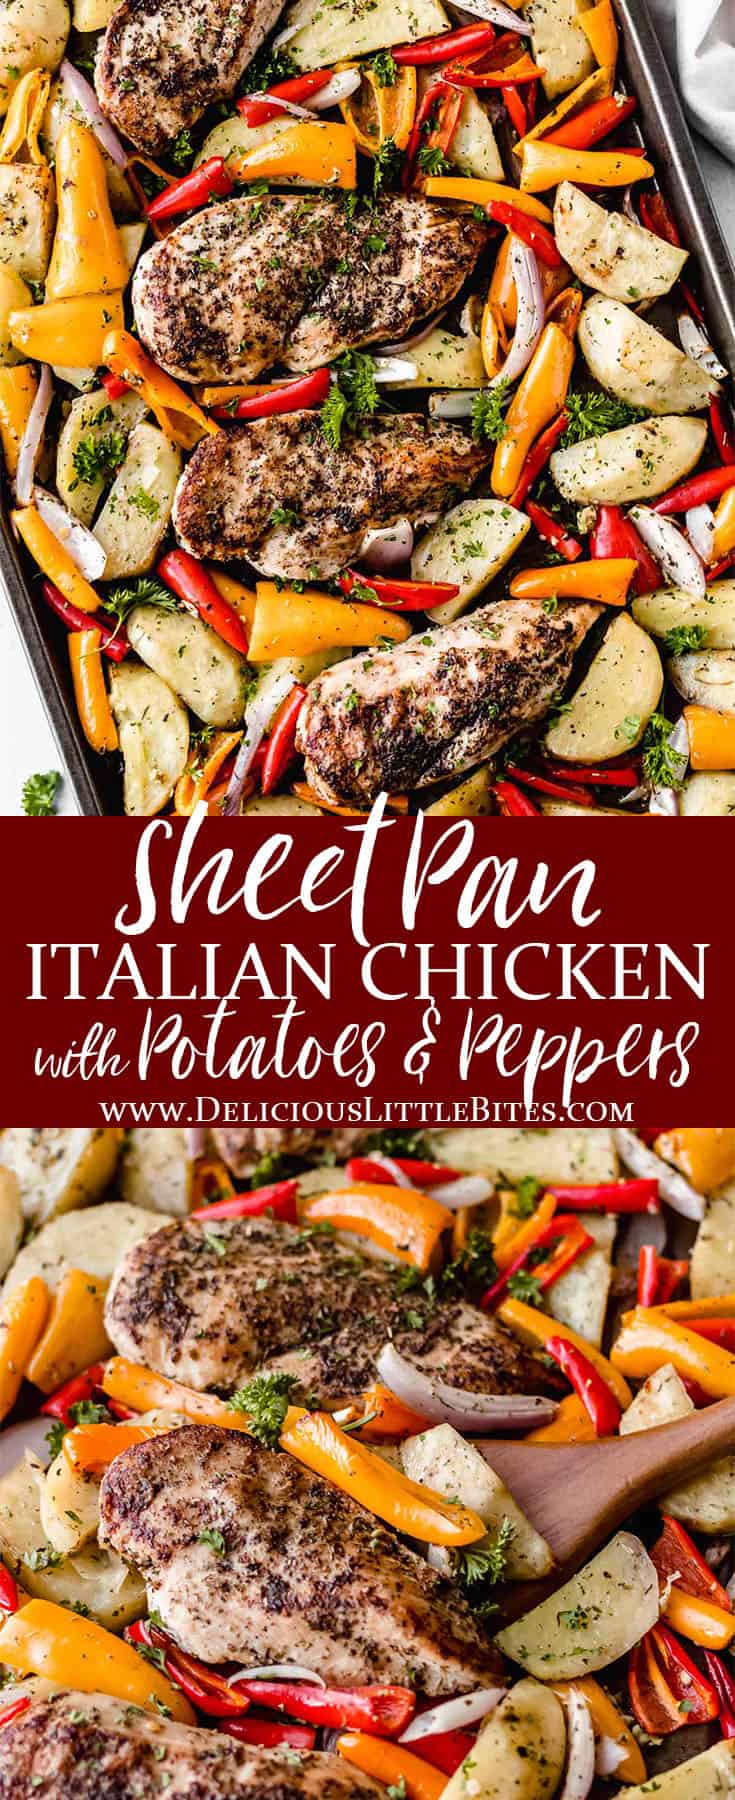 SHEET PAN Italian Chicken (with Potatoes & Peppers)